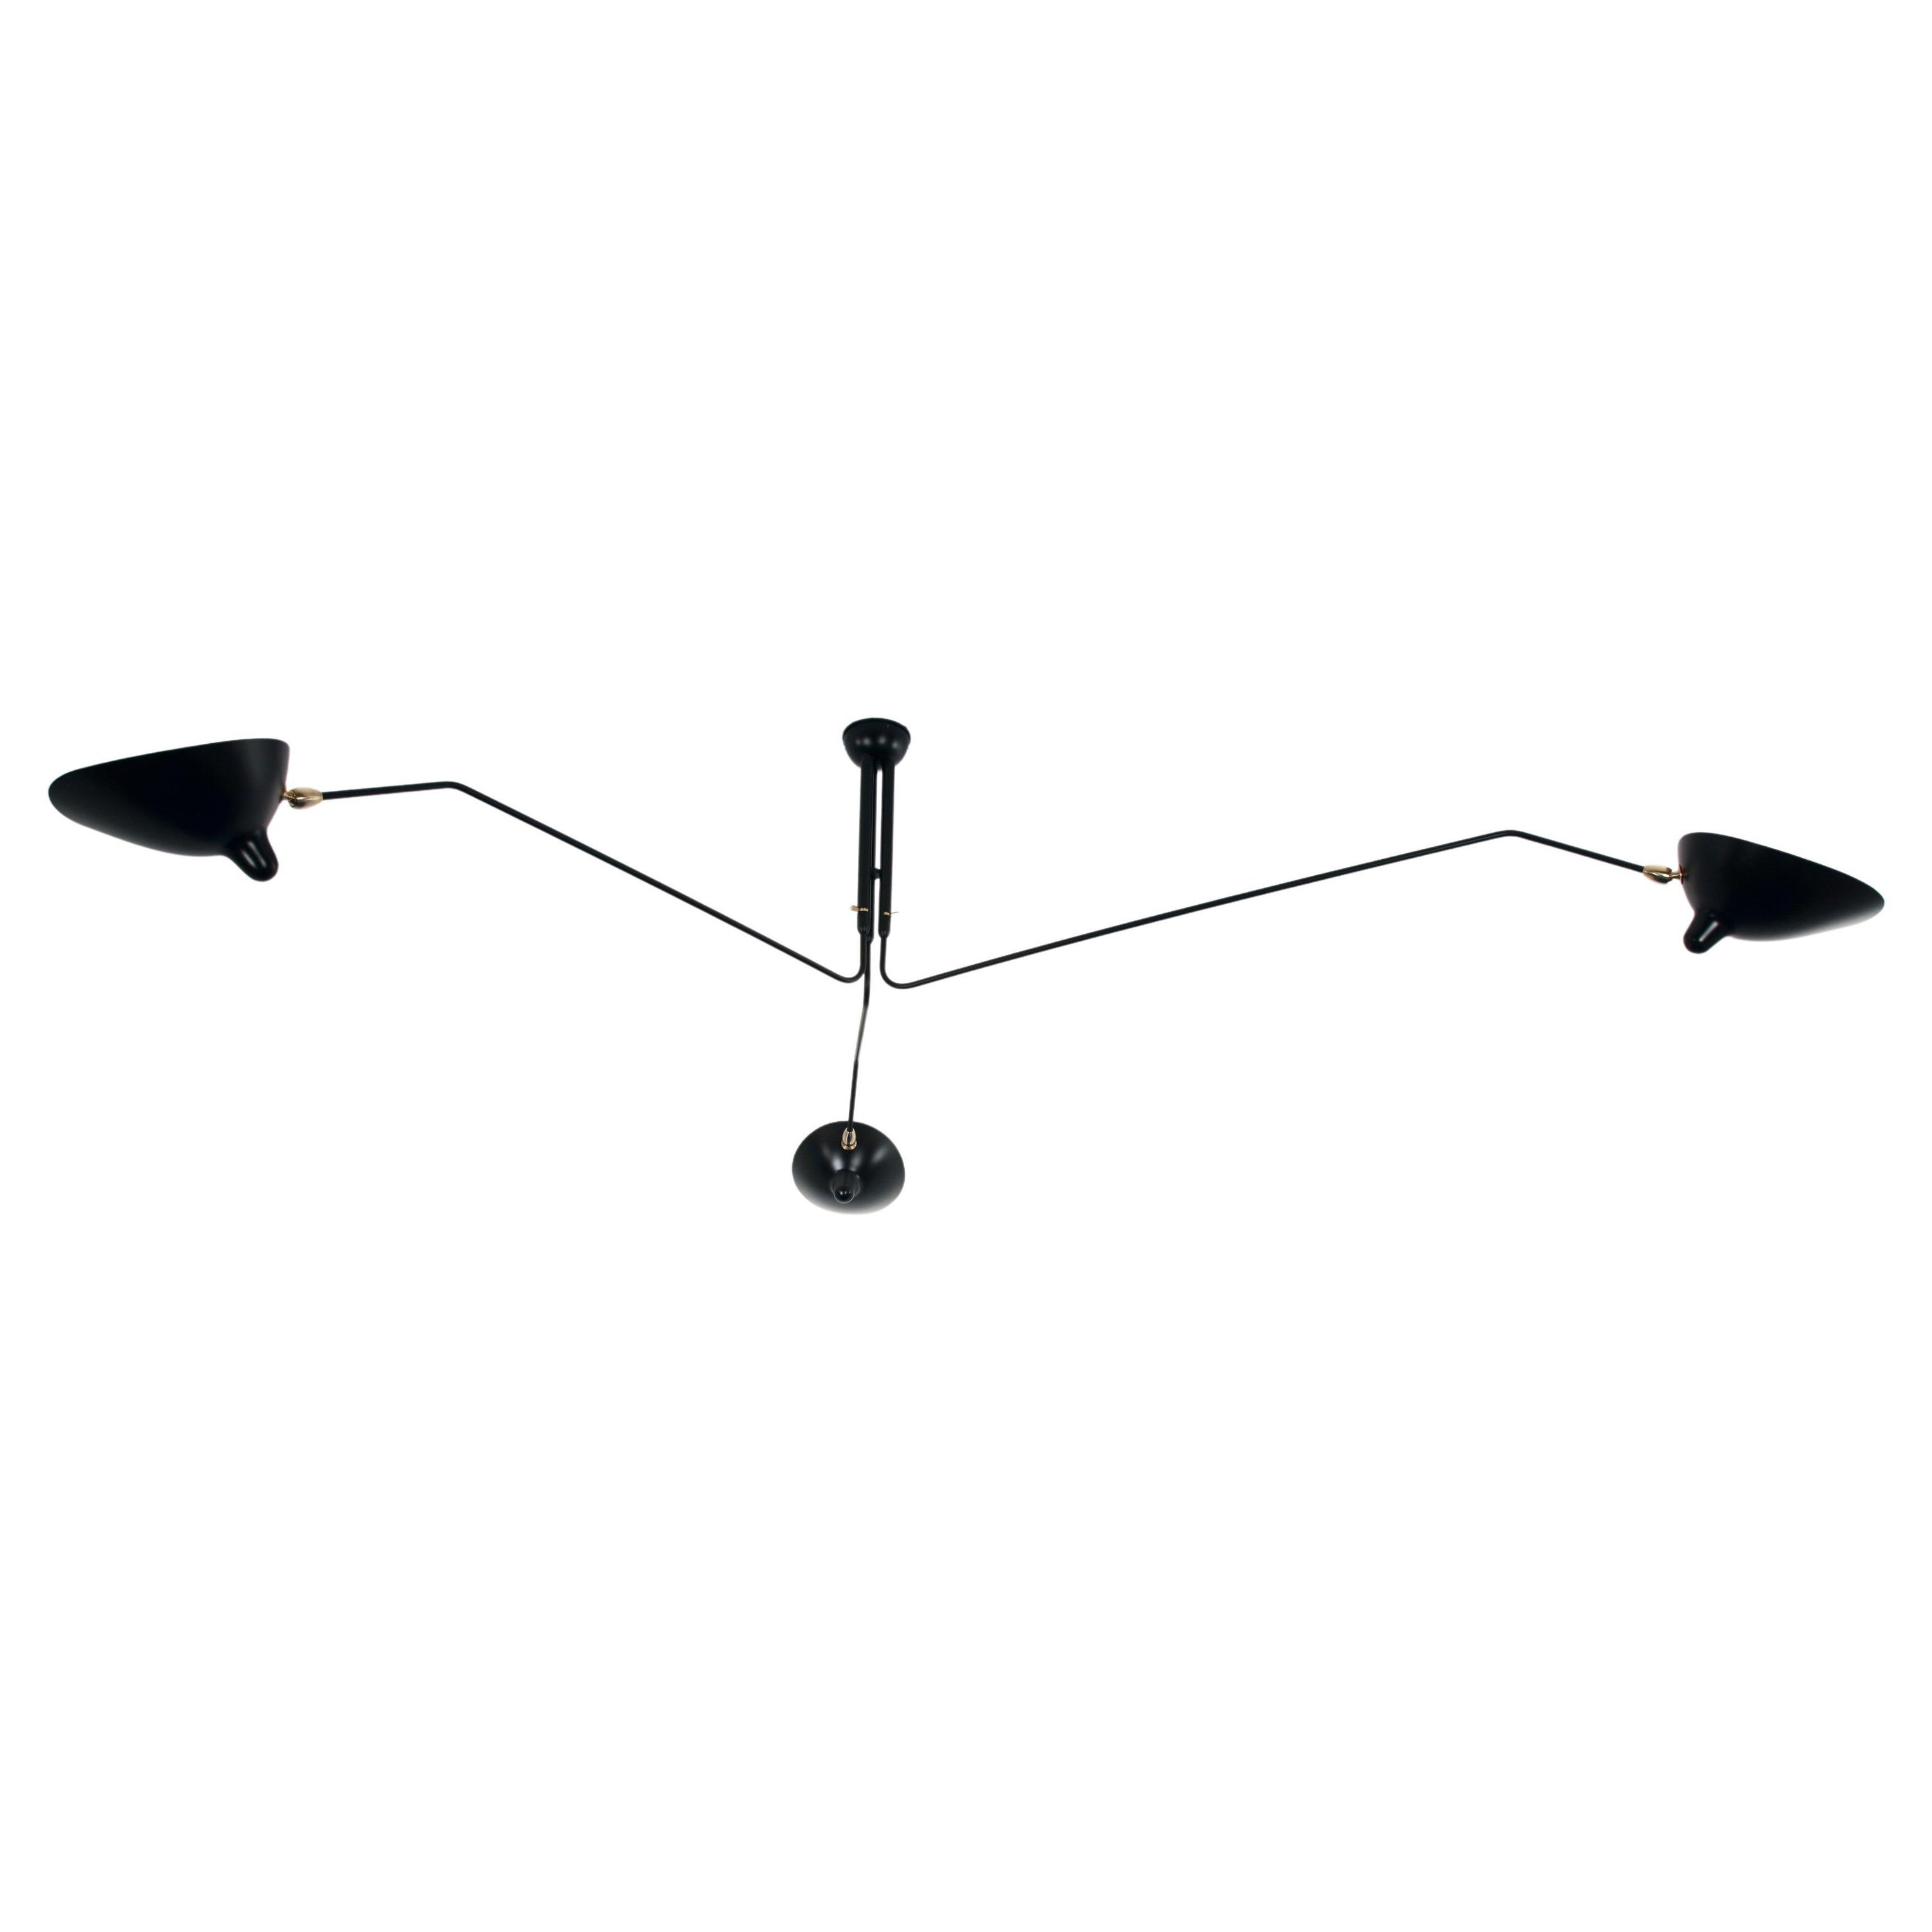 Ceiling Lamp 3 Rotating Arms by Serge Mouille For Sale